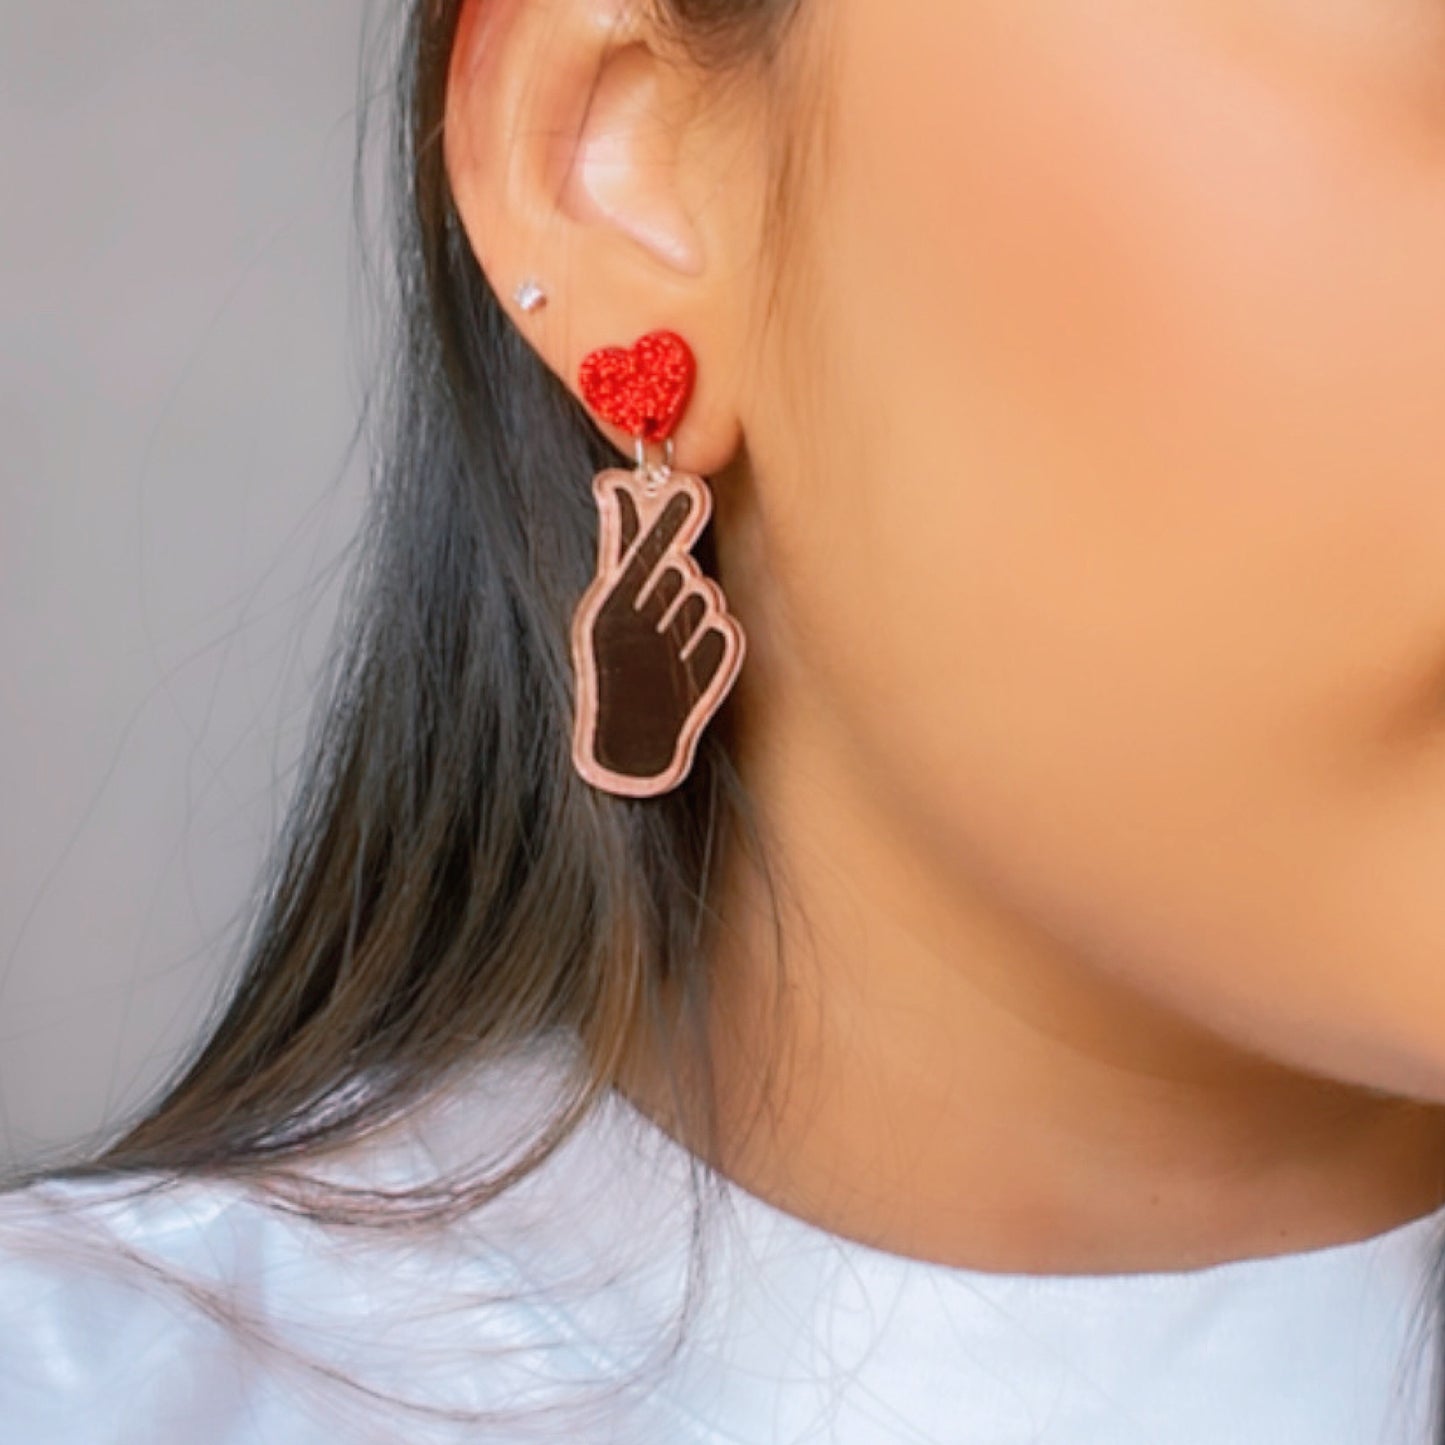 K-Pop Love Earrings - Rosegold and Red - Nian by Nidhi - worn by a woman